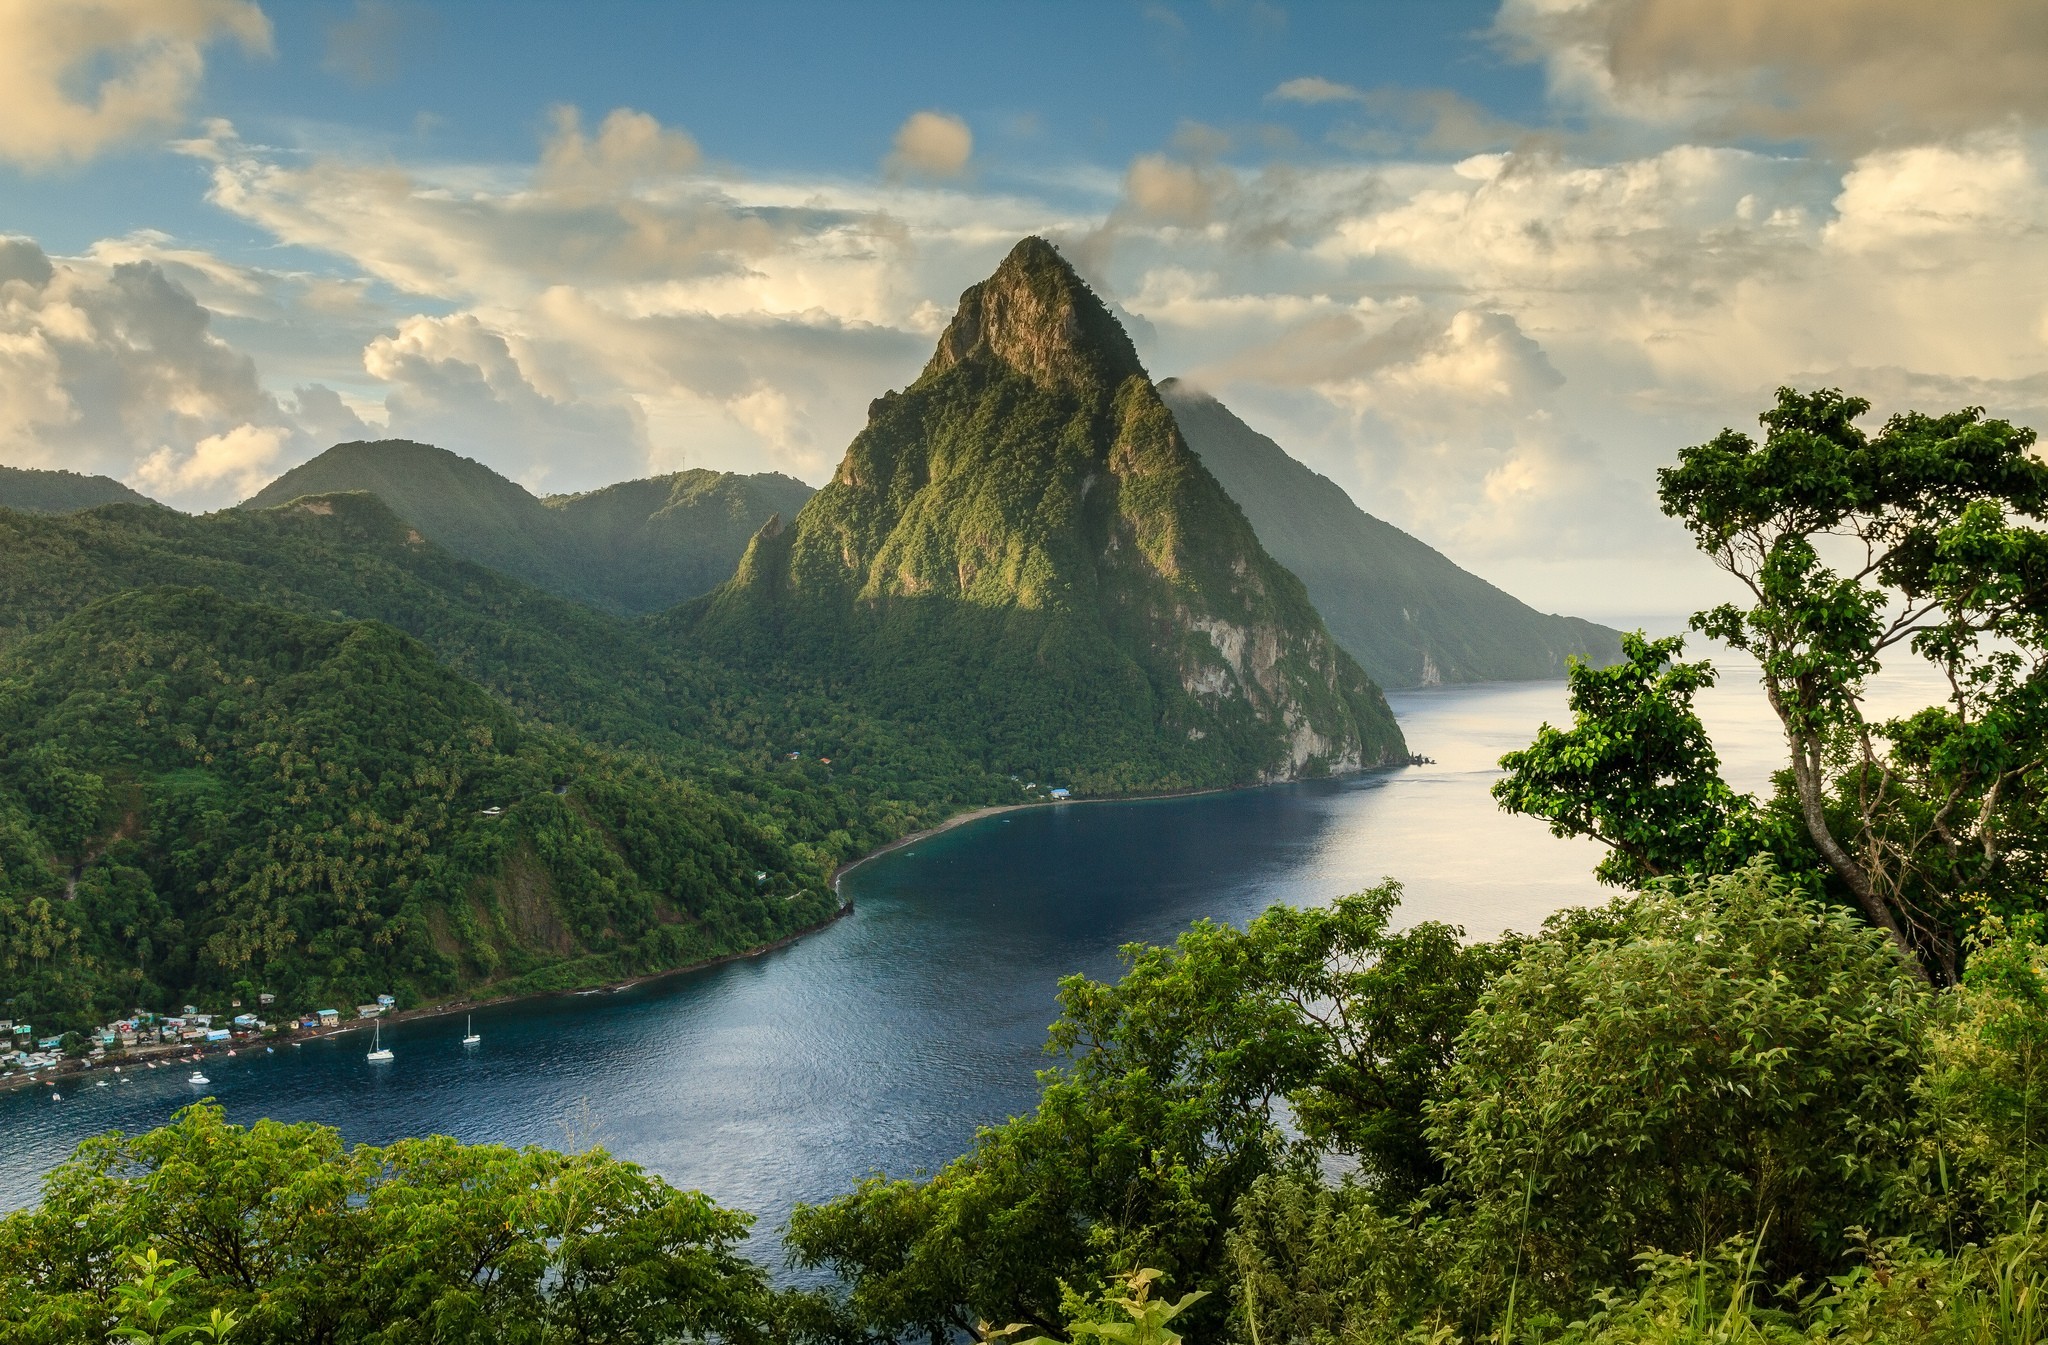 The Pitons,Soufriere,Saint Lucia by Paul Baggaley